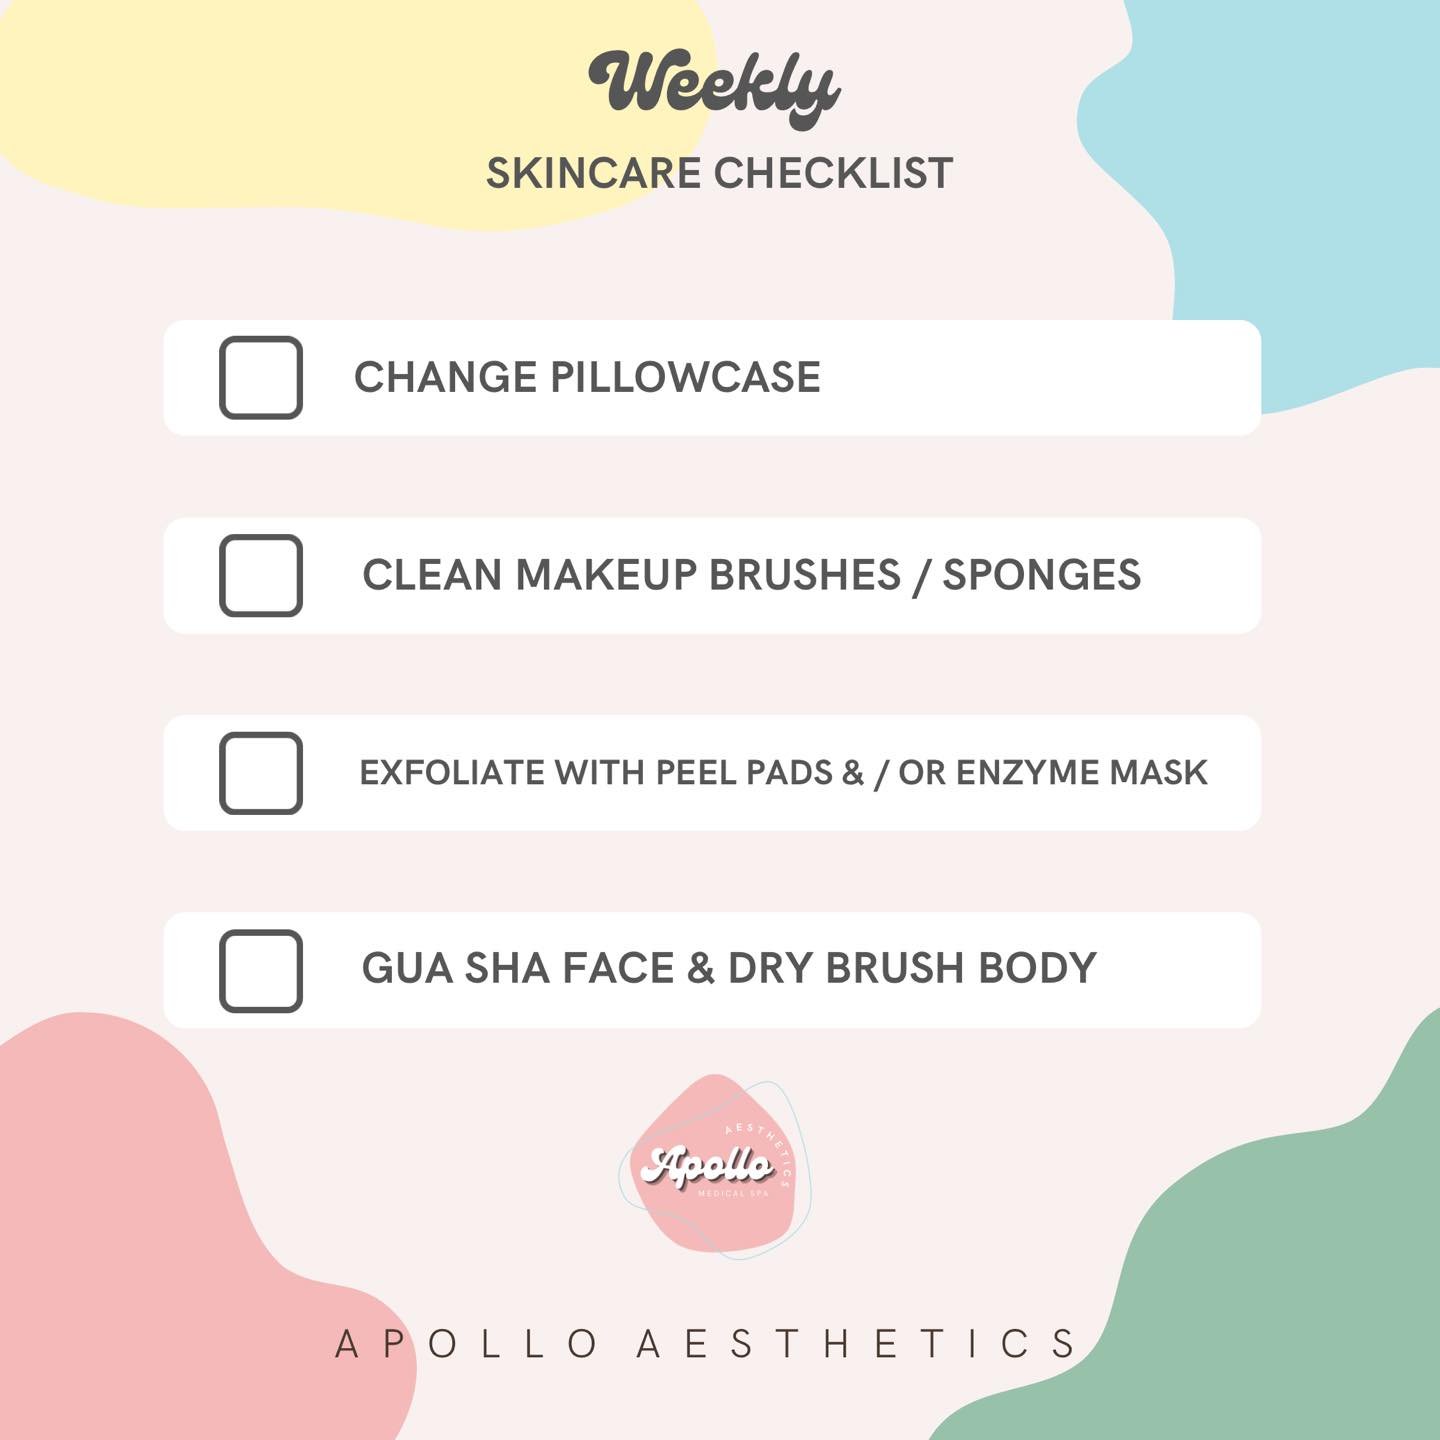 Happy Monday! Did you get your weekly skincare check list done for a fresh new week? 😇
These help tremendously for my acne prone skin types, but also just good for overall skin health. 
💤 Pillowcase- can you imagine all the dead skin build up on th